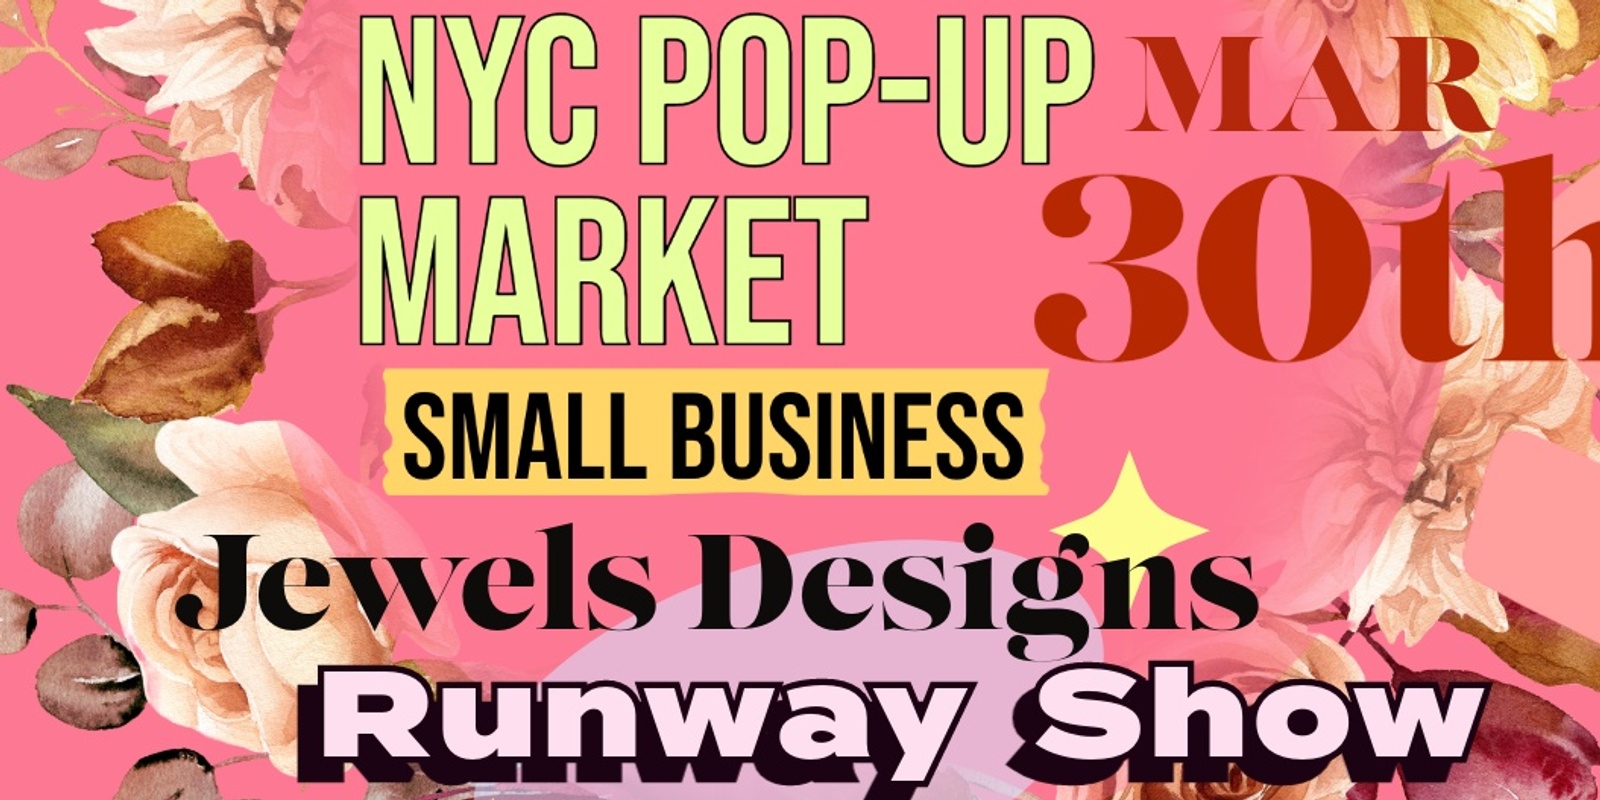 Banner image for UNION SQUARE NYC POP-UP SHOP MARKET Presents: Jewels Design Runway Show: ALIEN "A FASHION ODYSSEY"